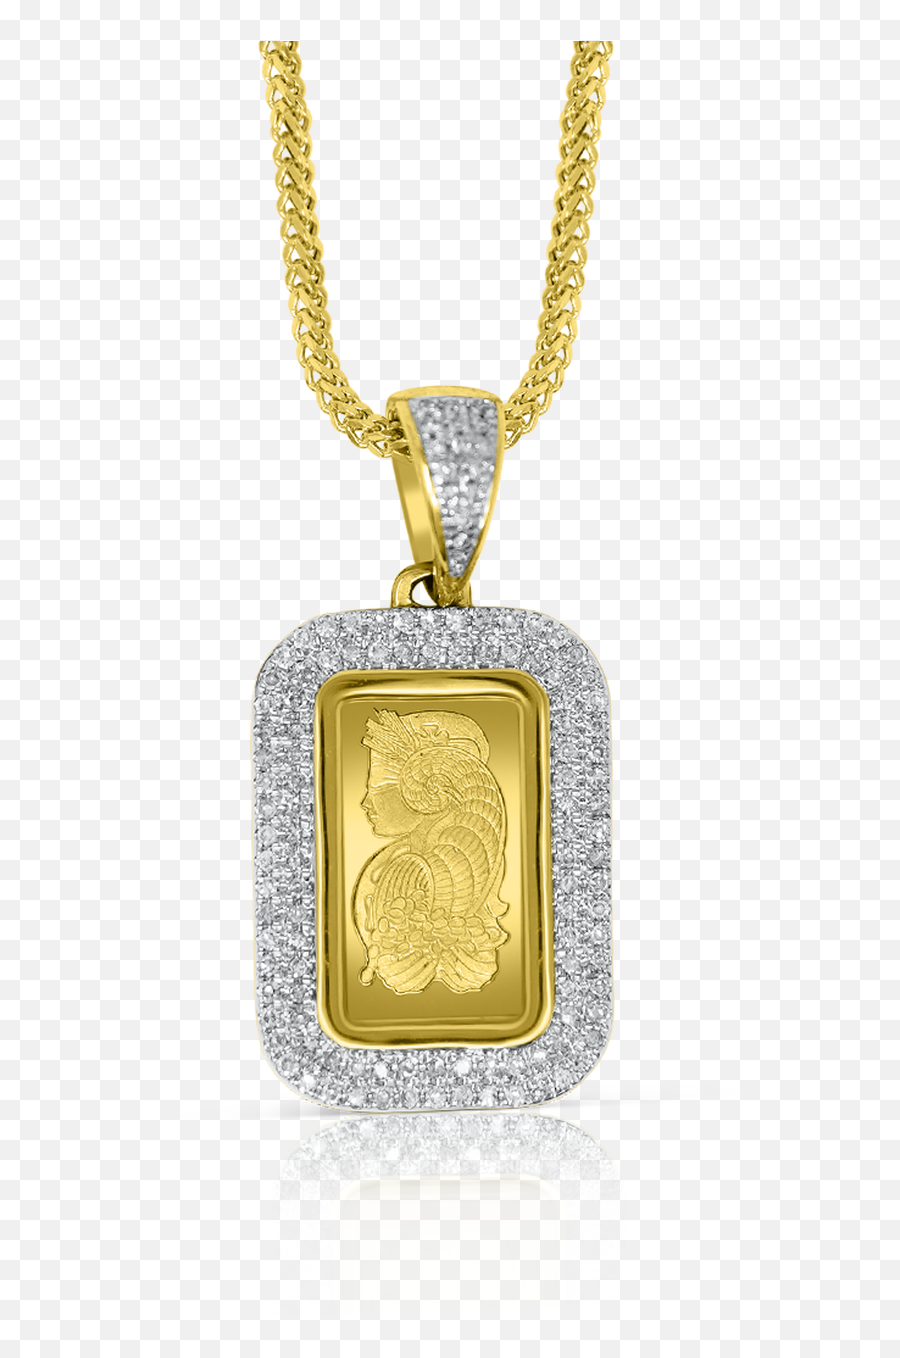 24k Gold Pamp Suisse Bar Pendant 033ct With Chain - Locket Png,Gold Chain Transparent